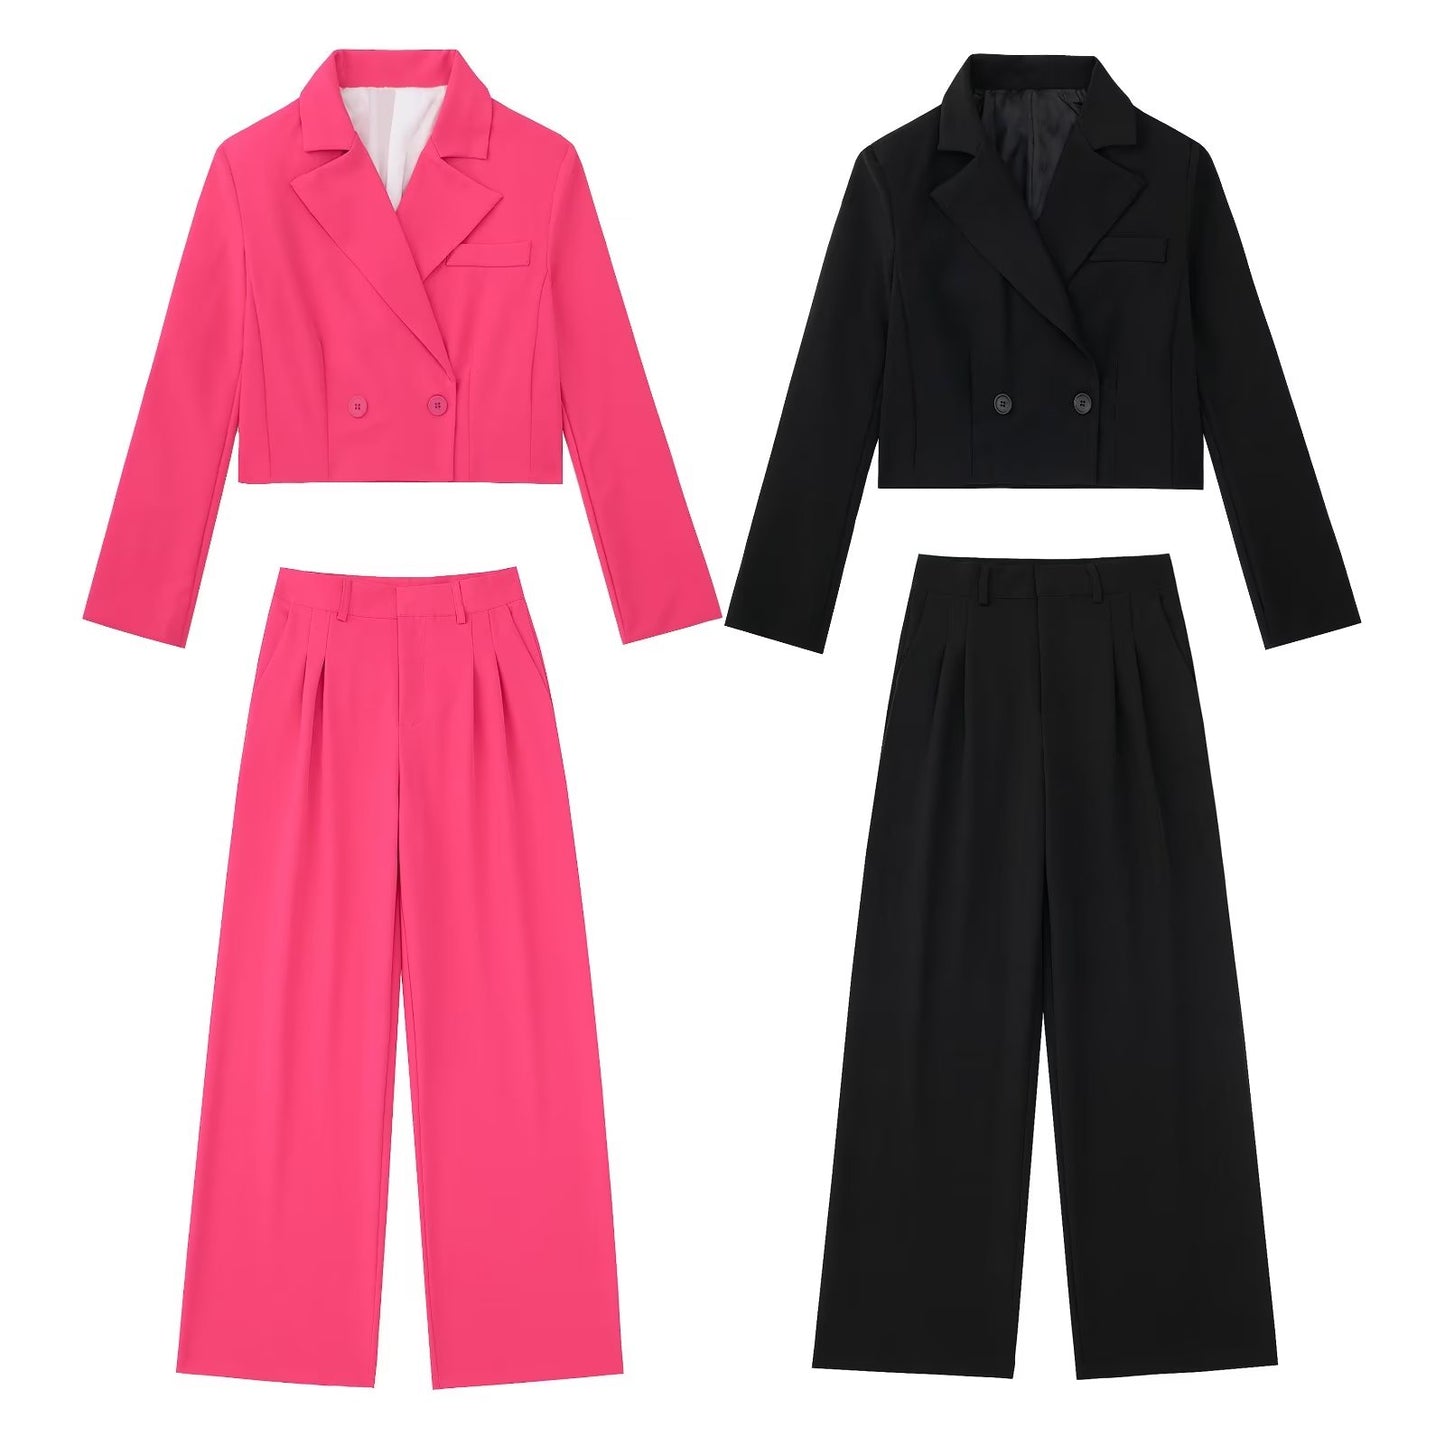 Fall Outfits | Hot Pink Blazer Pants Outfit 2-piece Set